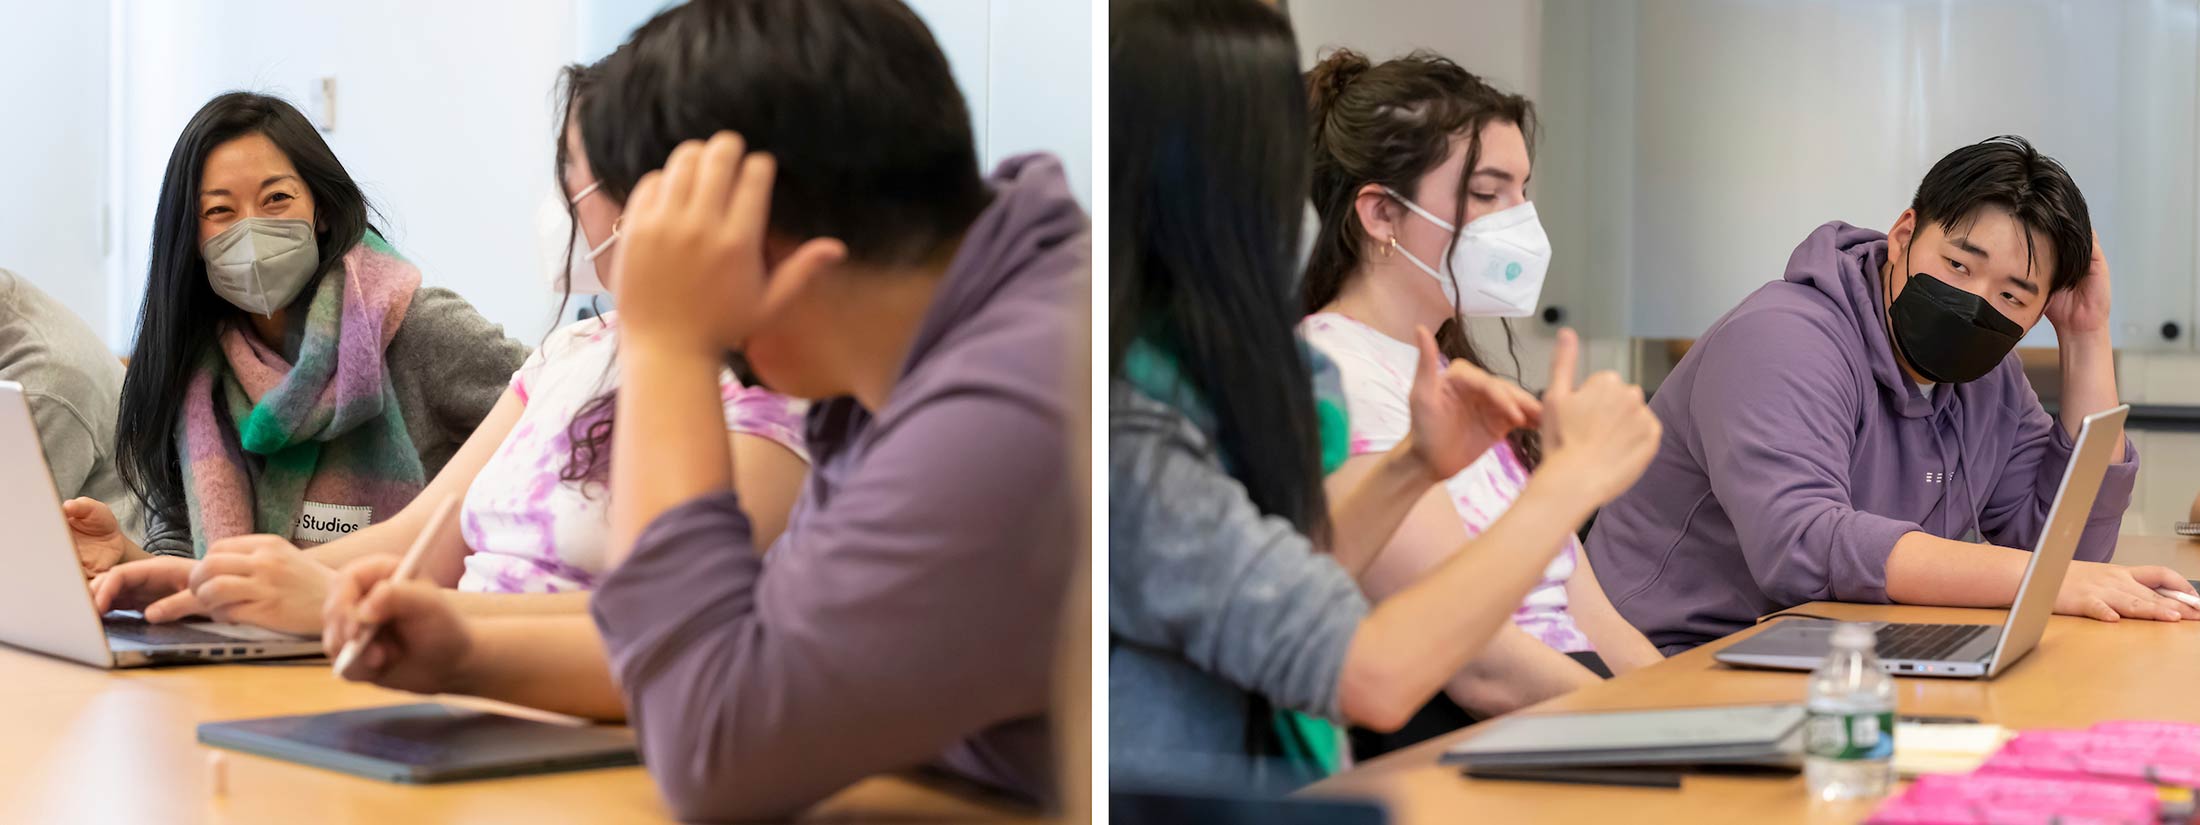 A student rests his head on his hand as he listens intently to Katie Kitamura.